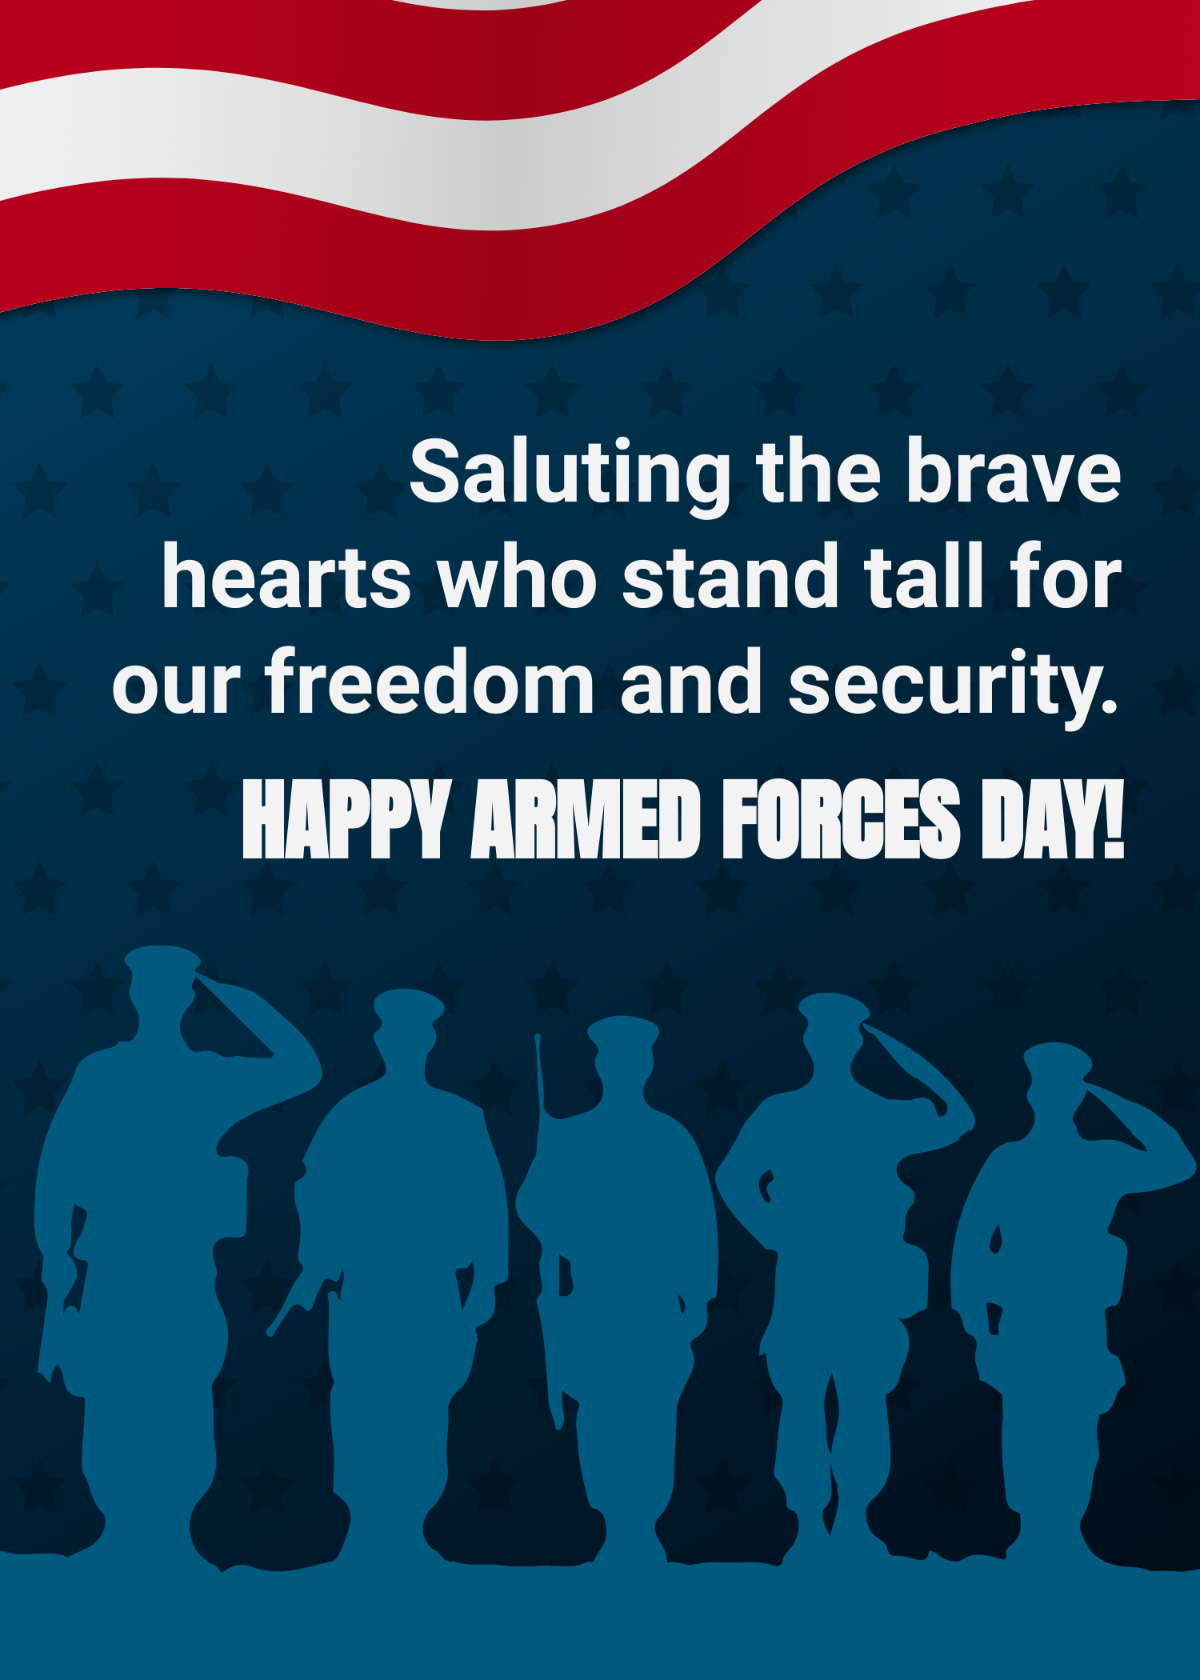 Armed Forces Day Message